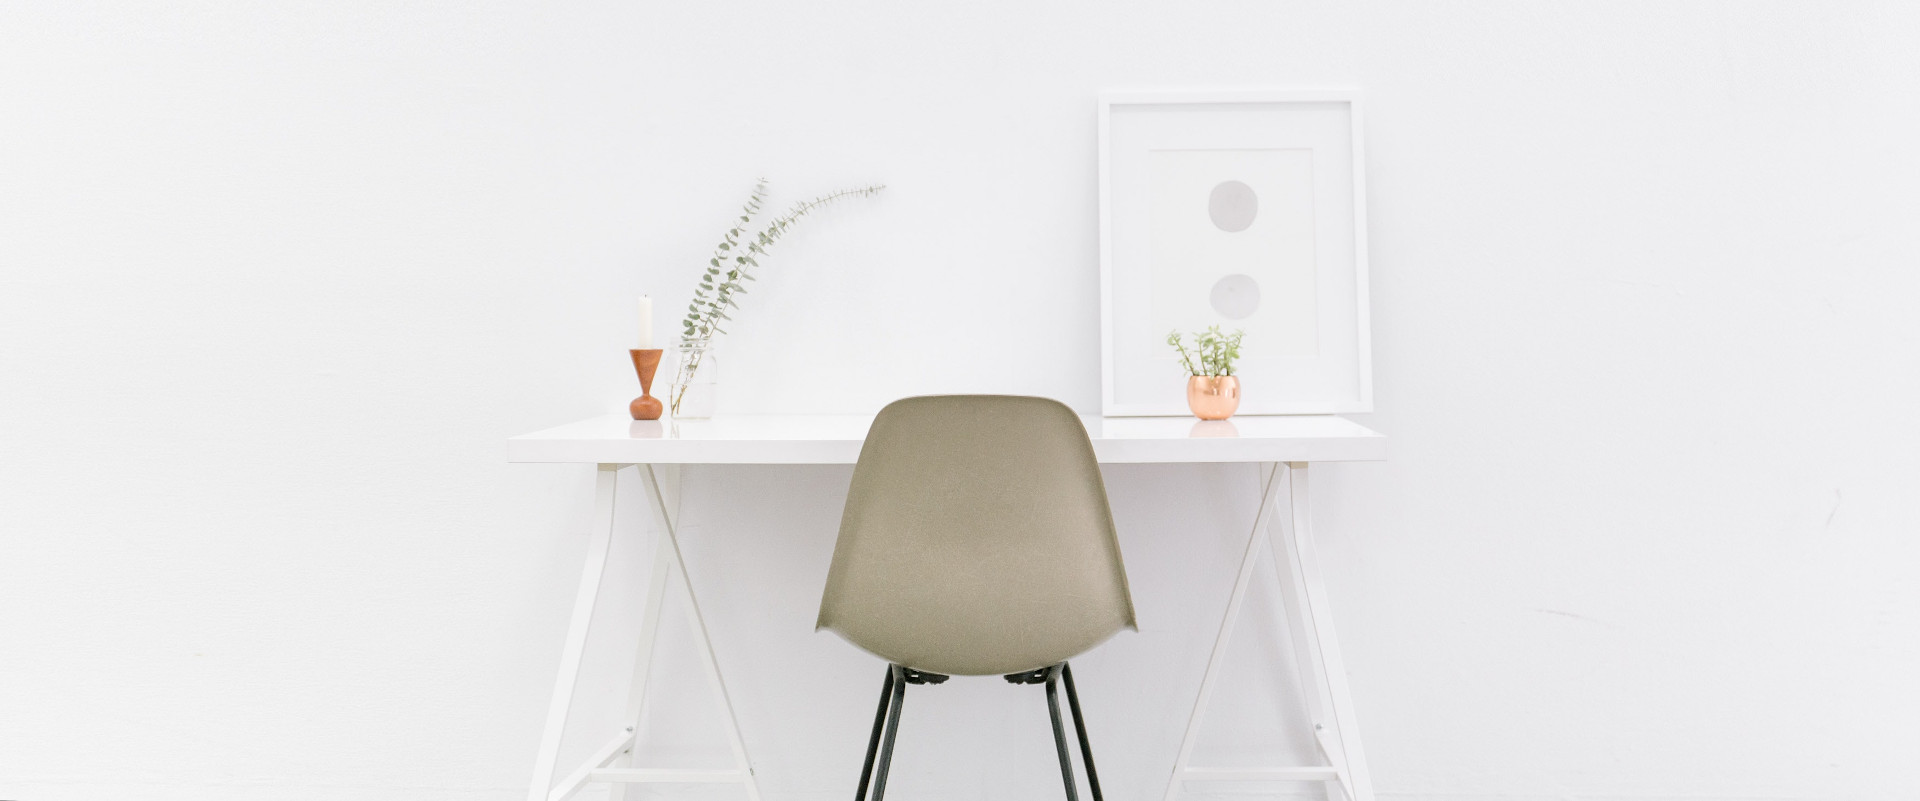 Minimalism can make our lives easier, greener and richer